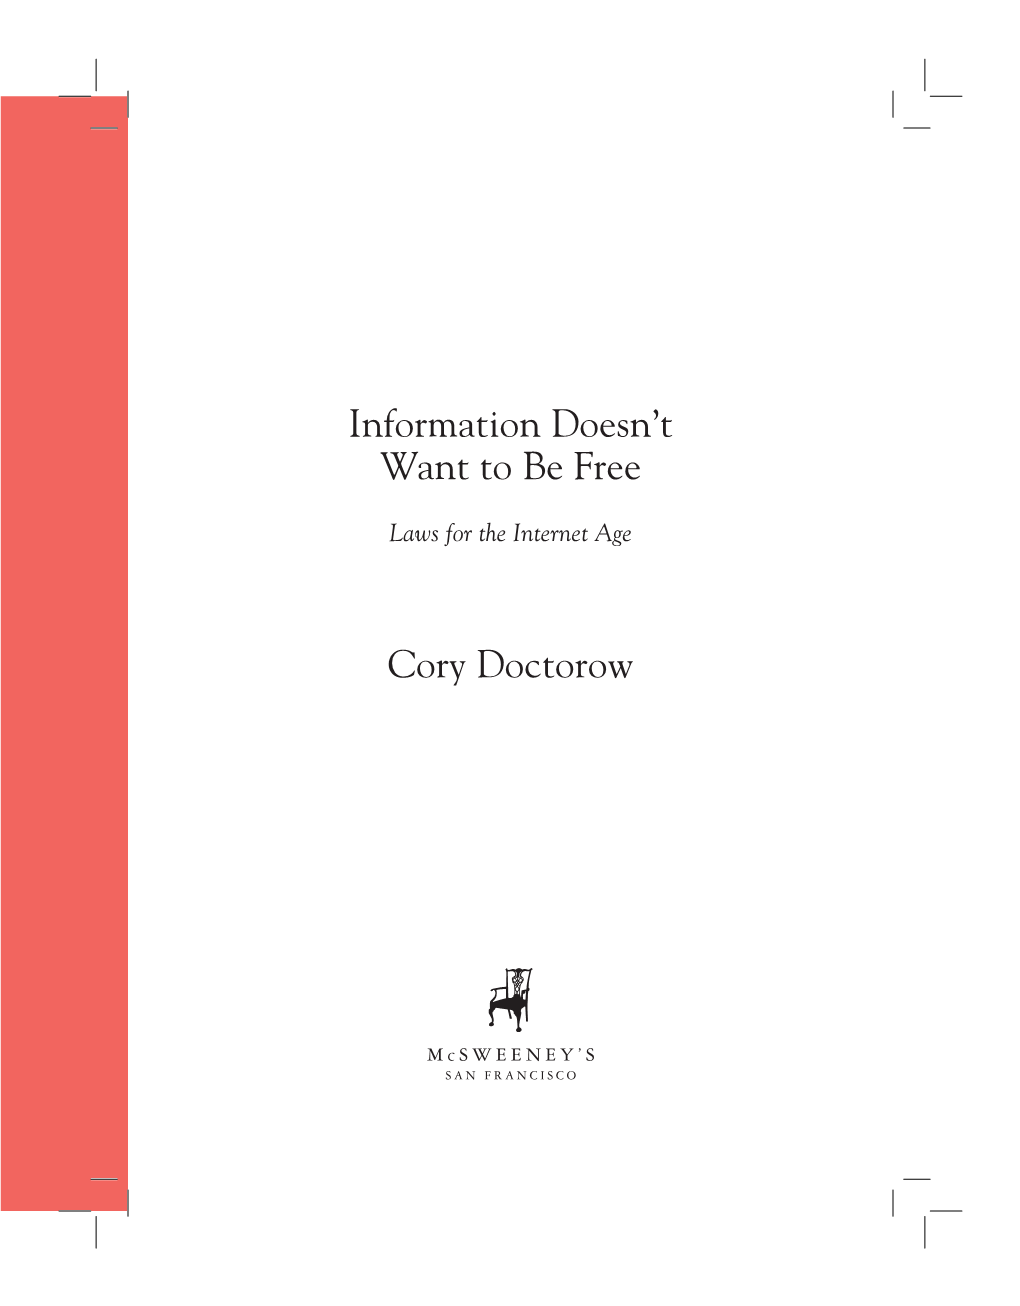 Information Doesn't Want to Be Free Cory Doctorow